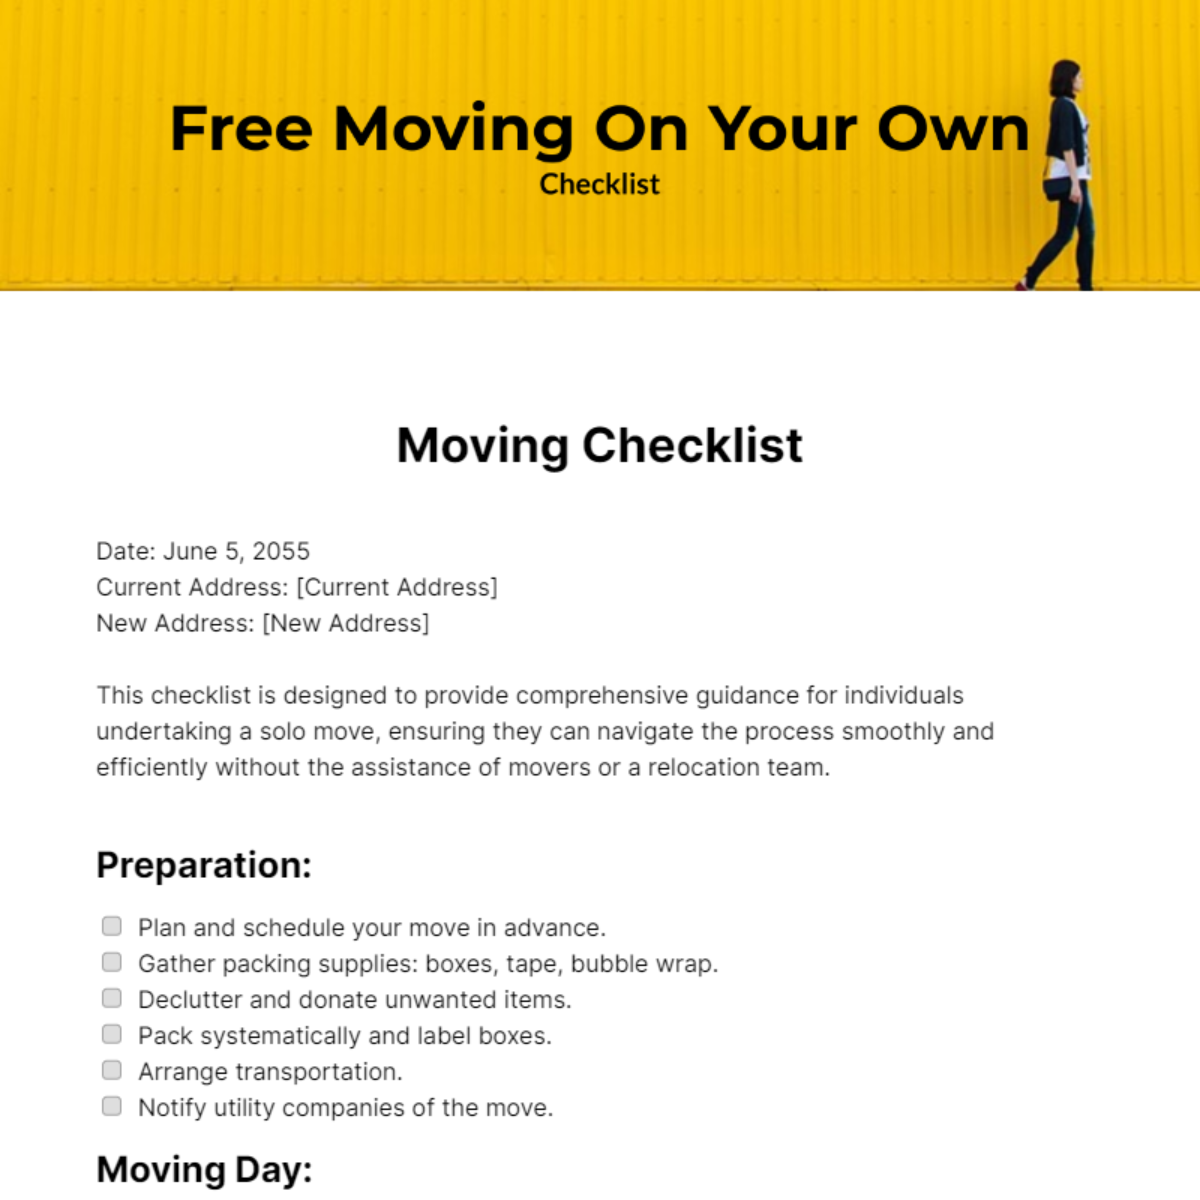 Free Moving On Your Own Checklist Template